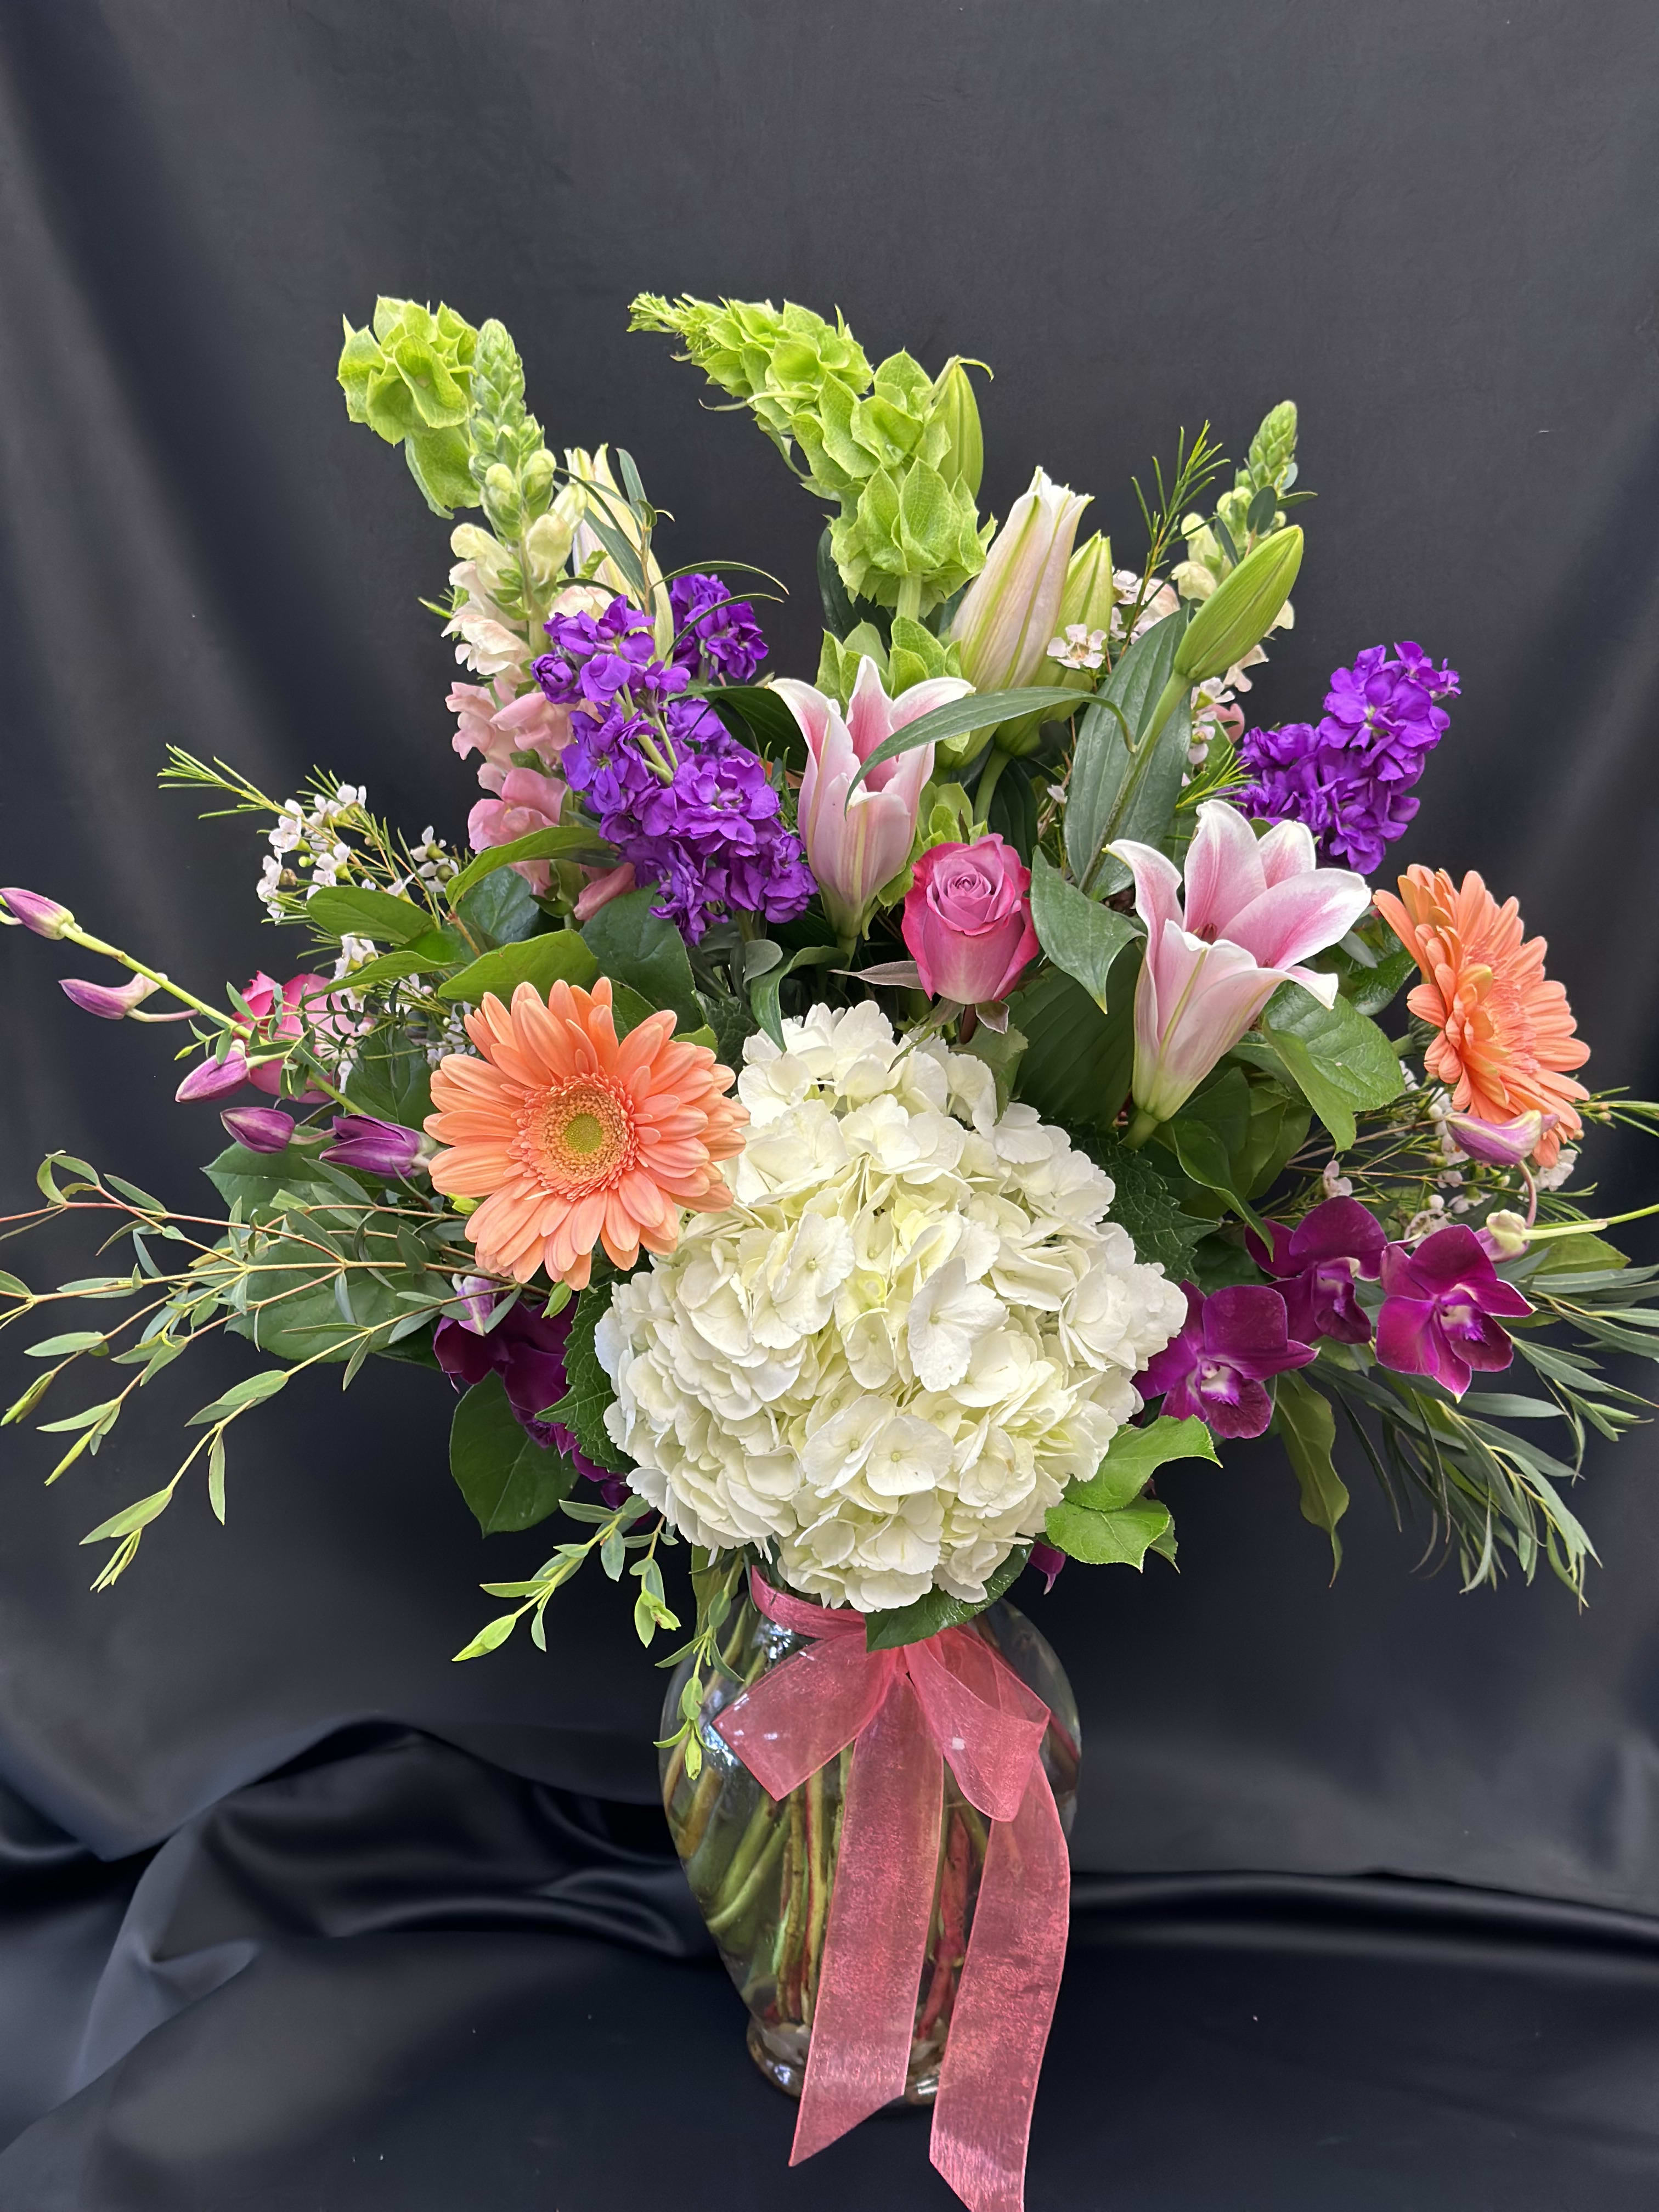 Lush &amp; Lovely - A stunning mix of seasonal favorites  - always a show stopper! Fragrant stargazer lilies, bells of Ireland, hydrangea, stock, snapdragons and roses.  